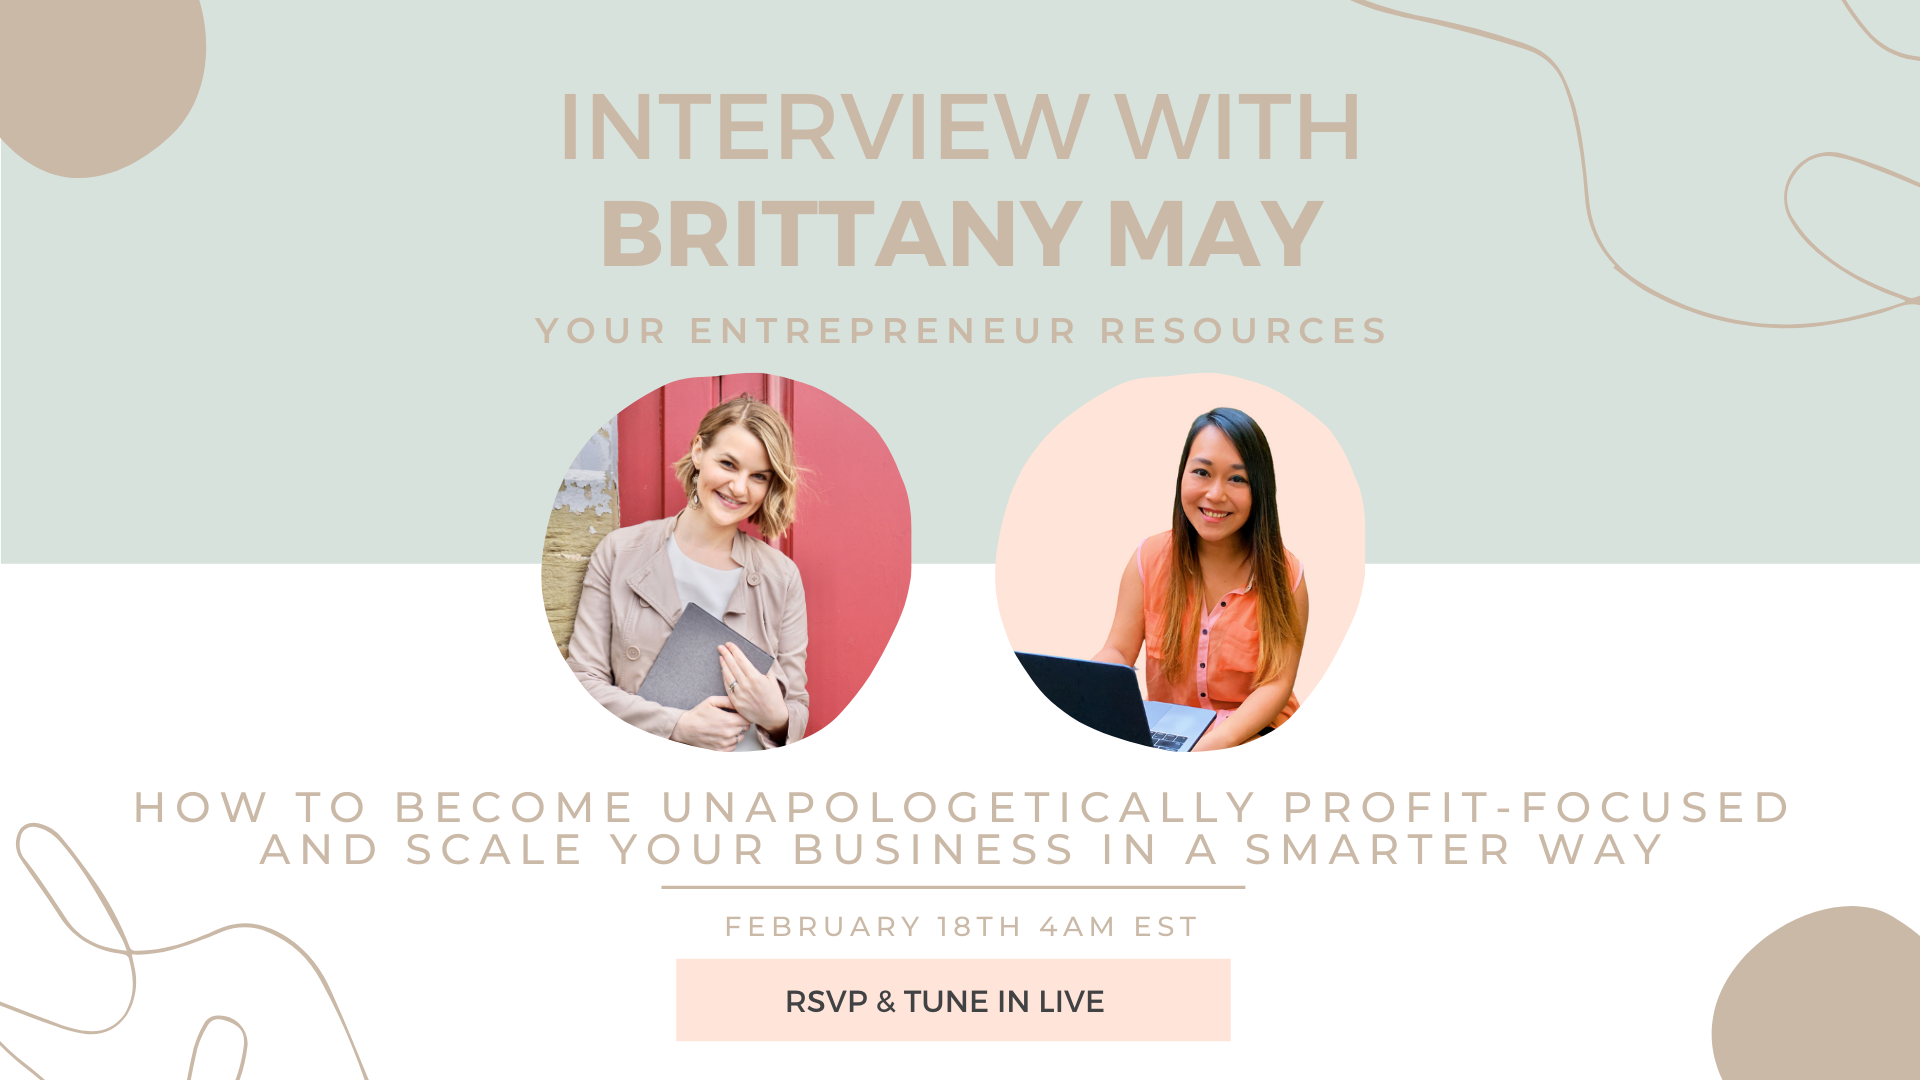 Become Unapologetically Profit-focused & Scale your business in a smarter way with Brittany May